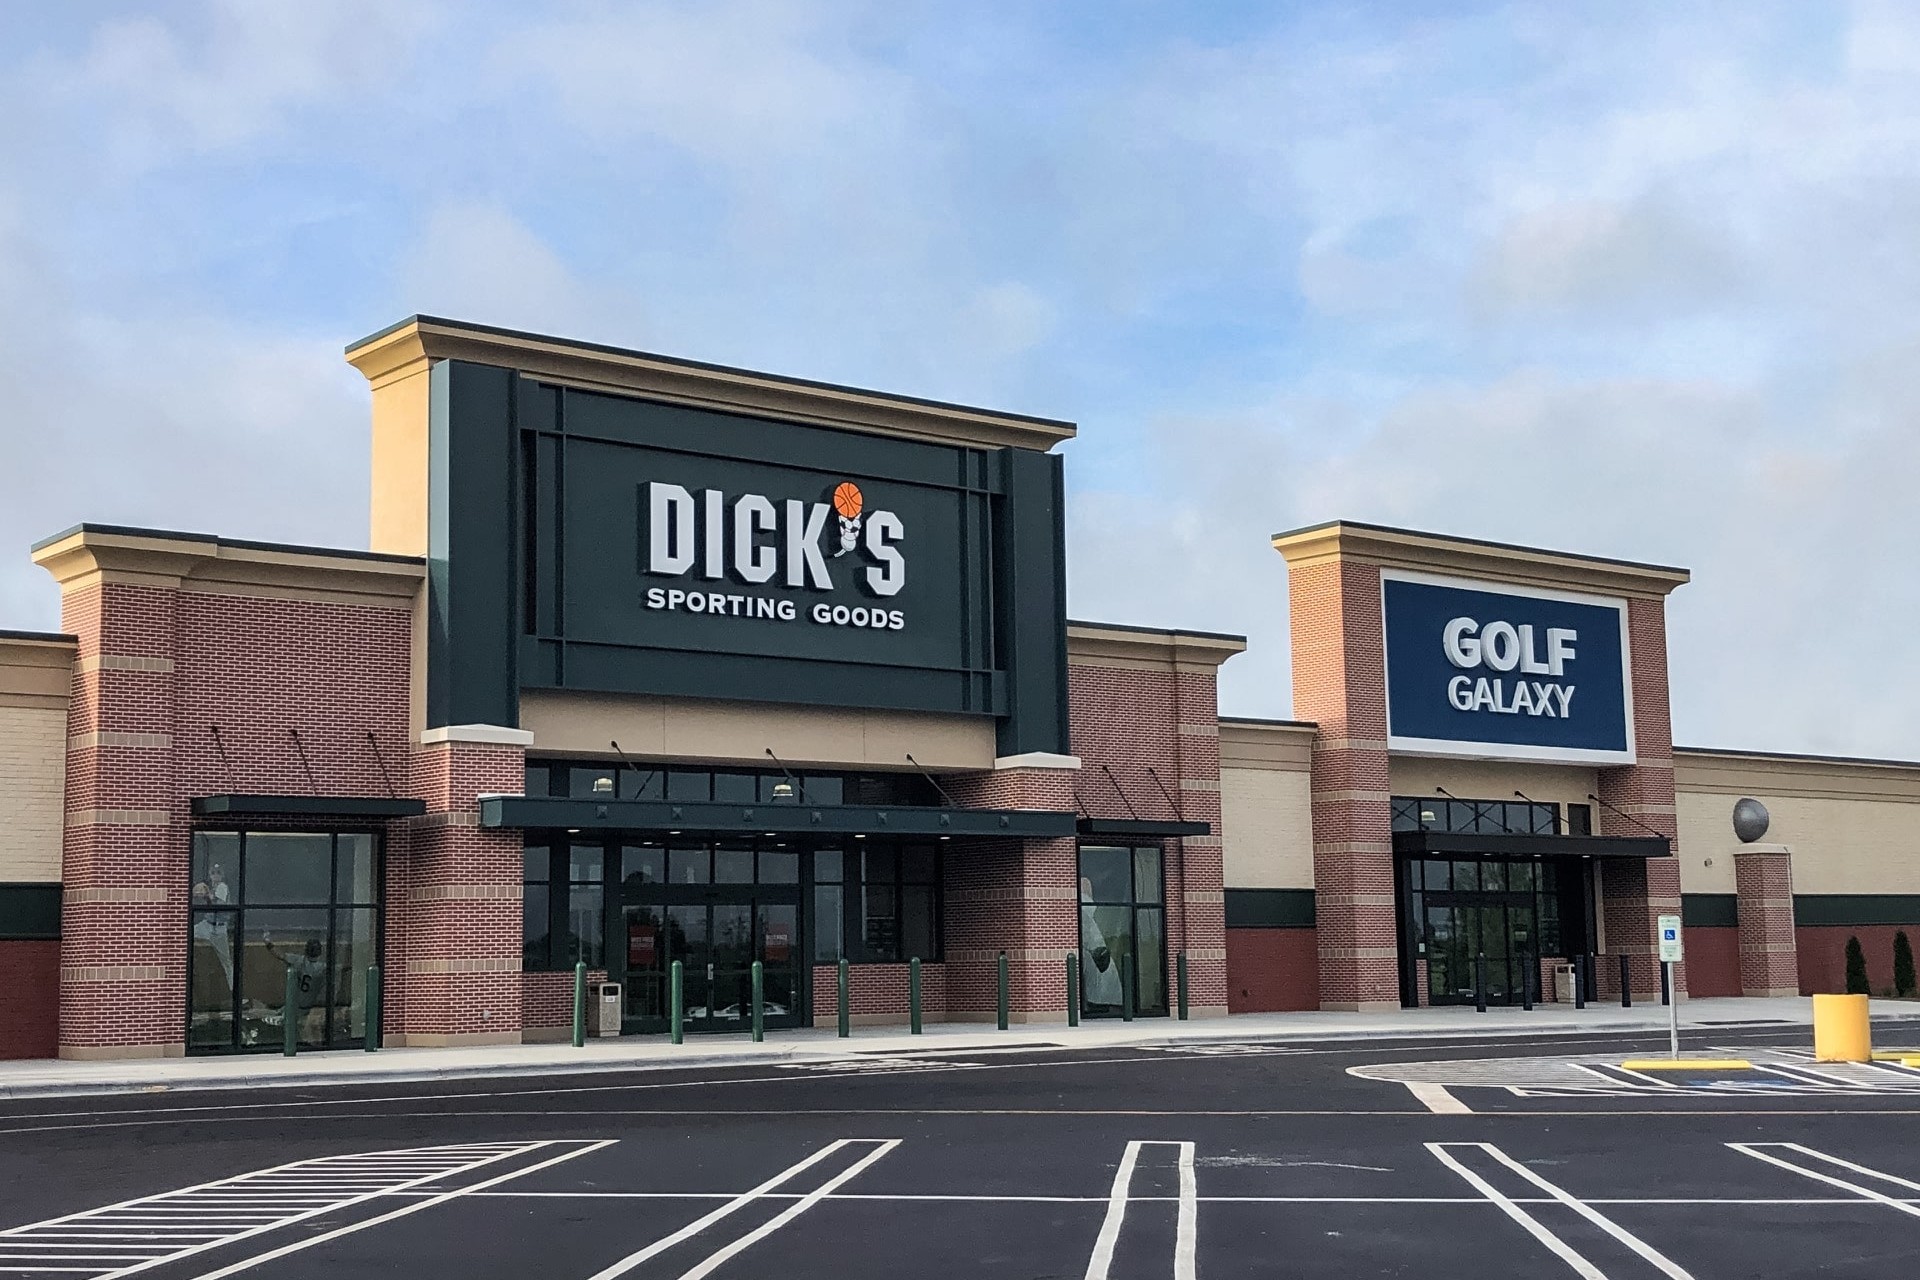 DICK'S Sporting Goods Announces Grand Opening of 11 Stores, the addition of Soccer Shops and its first-ever ScoreCard Appreciation Week in October